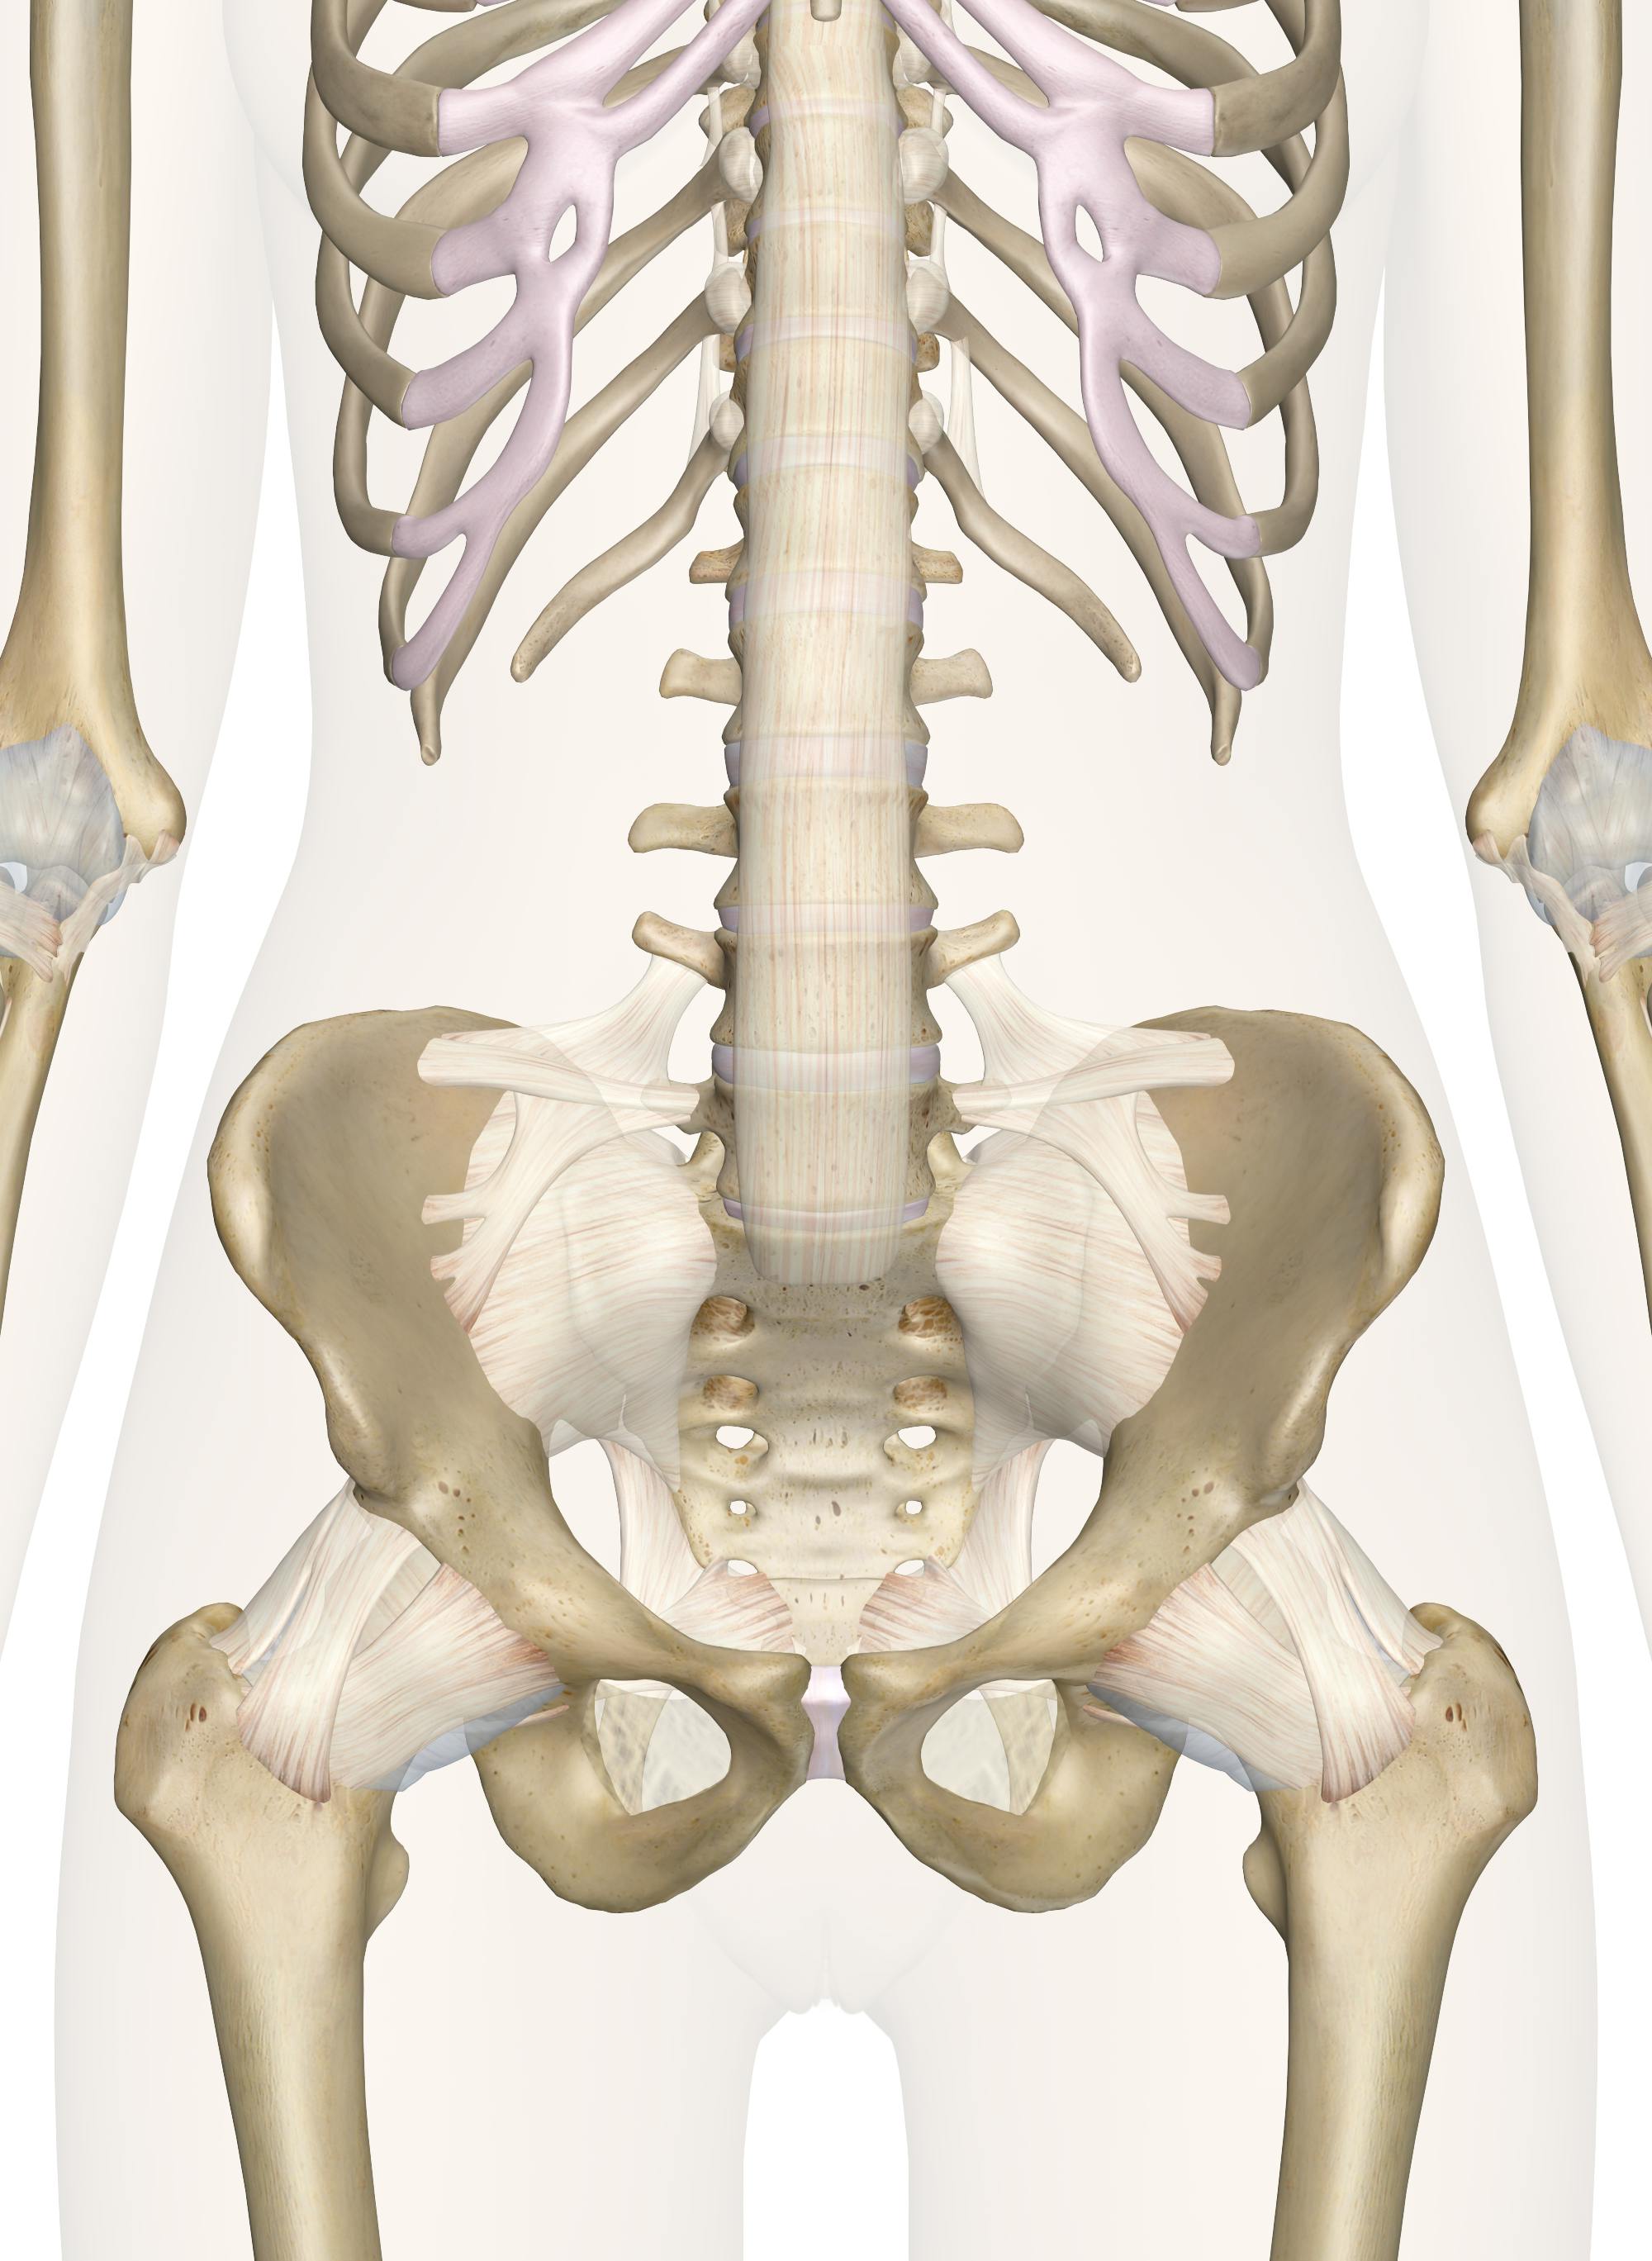 Lower Back Anatomy Pictures Koibana Info Human Body Organs Body The